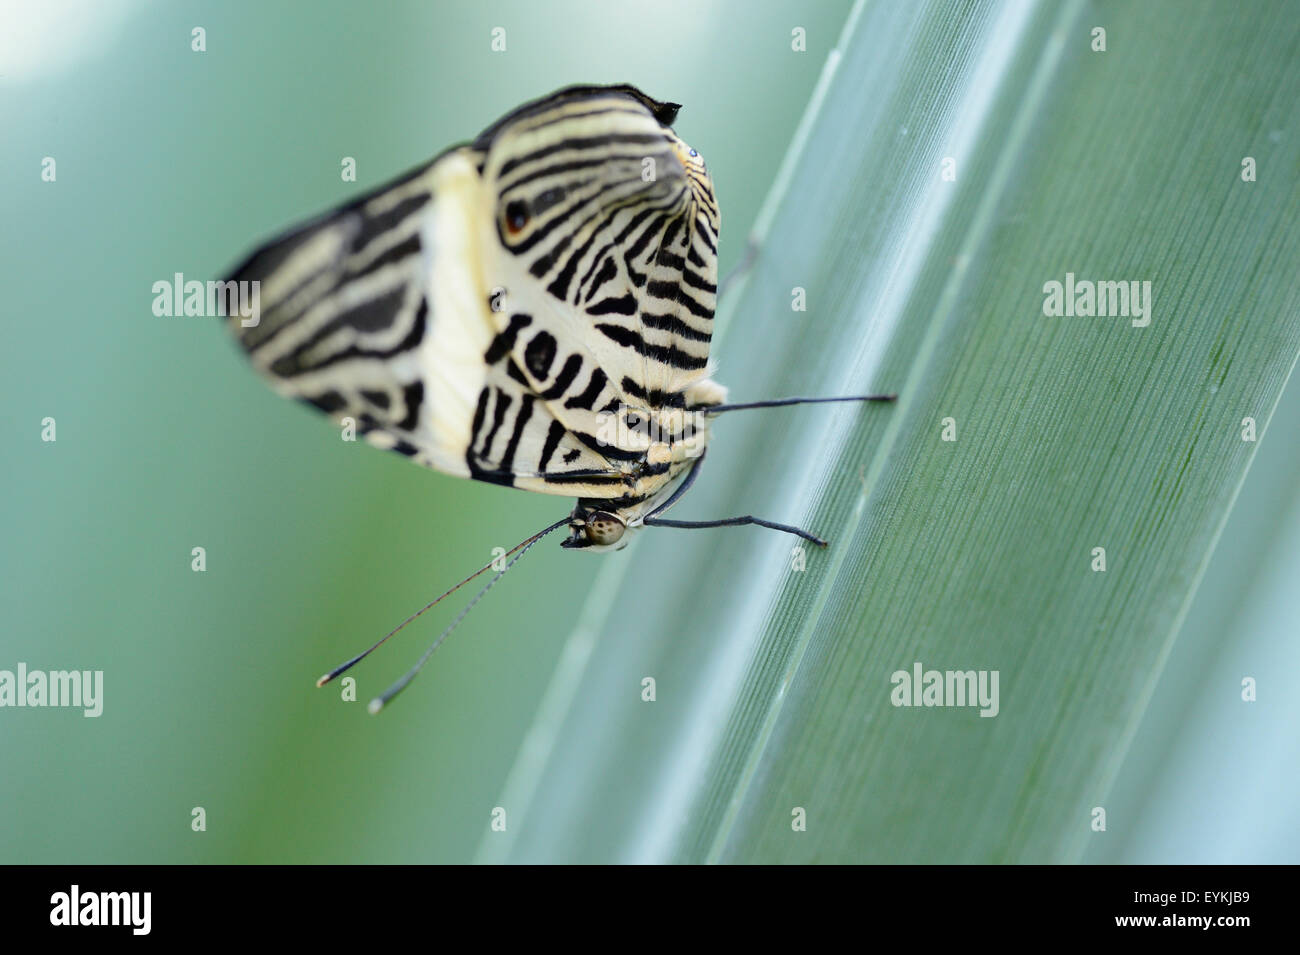 Tropical butterfly, Colobura dirce, zebra Mosaic, sit, leaves, lateral view, Stock Photo